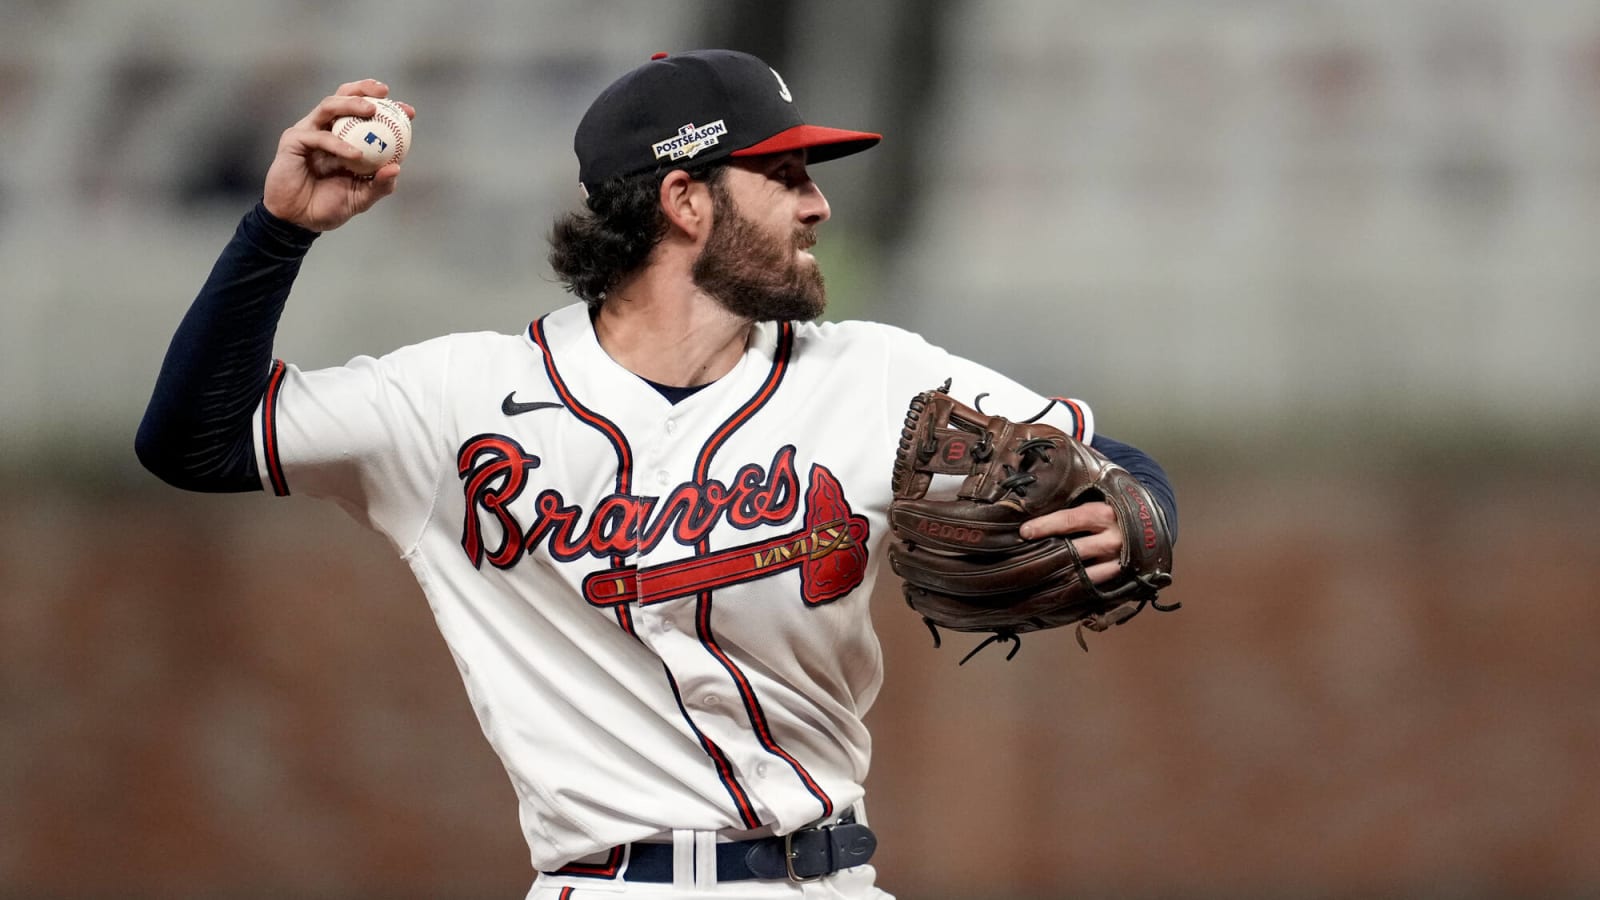 The Braves will receive a boost for their farm system after losing Dansby Swanson